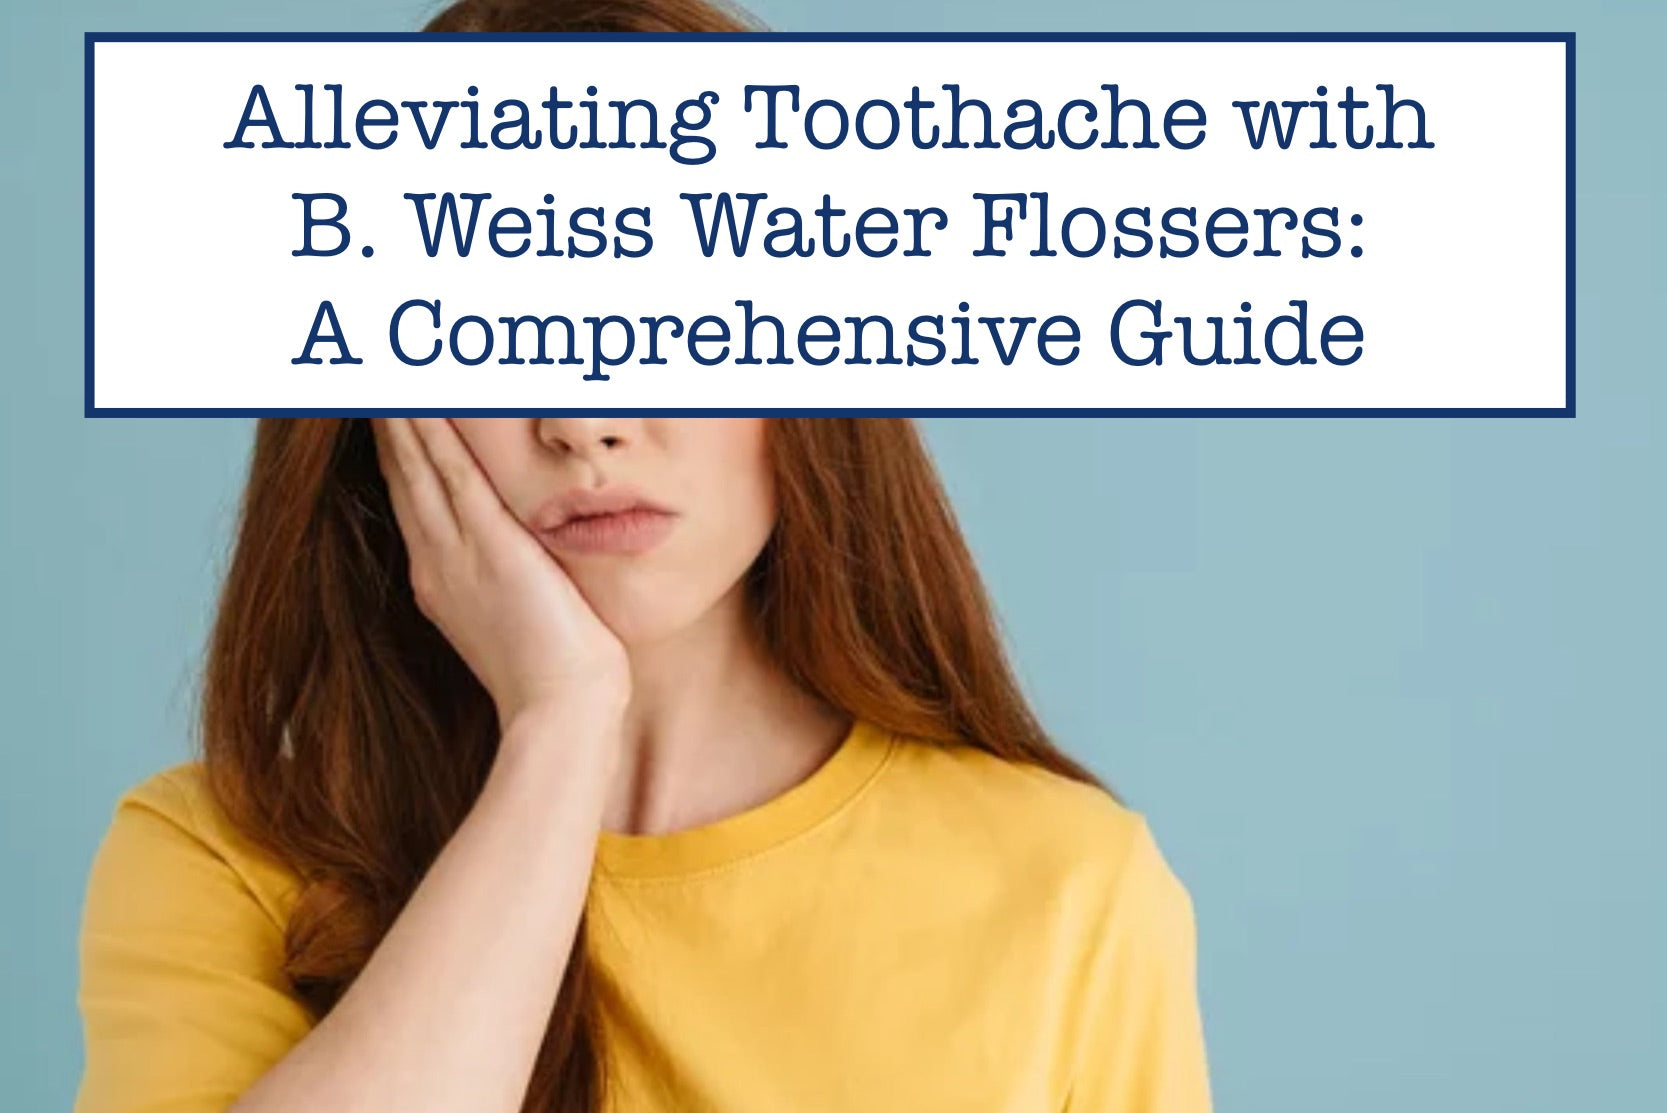 Alleviating Toothache with B. Weiss Water Flossers: A Comprehensive Guide